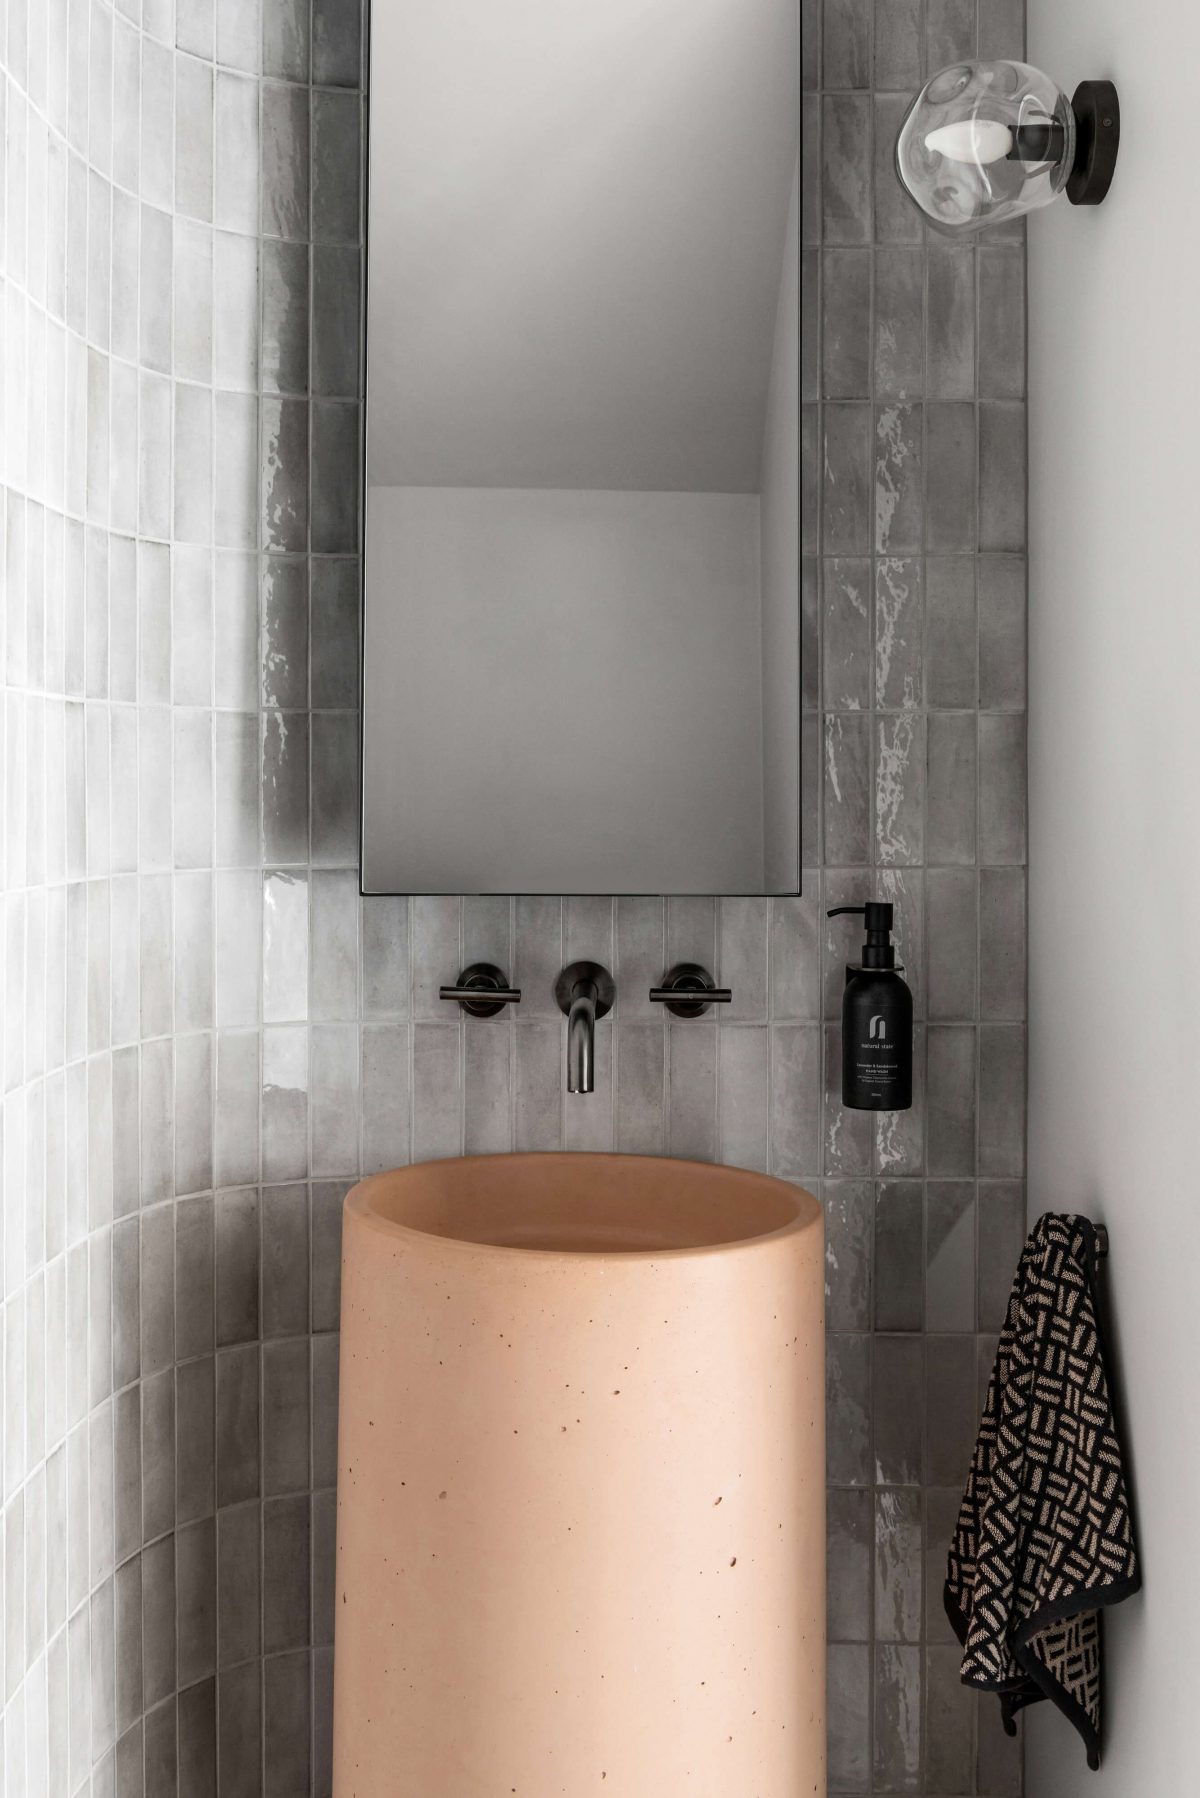 Hanging Mirror Pink Concrete Basin Gunmetal Tapware Curved Tiled Feature Wall Bathroom Renovation Melbourne